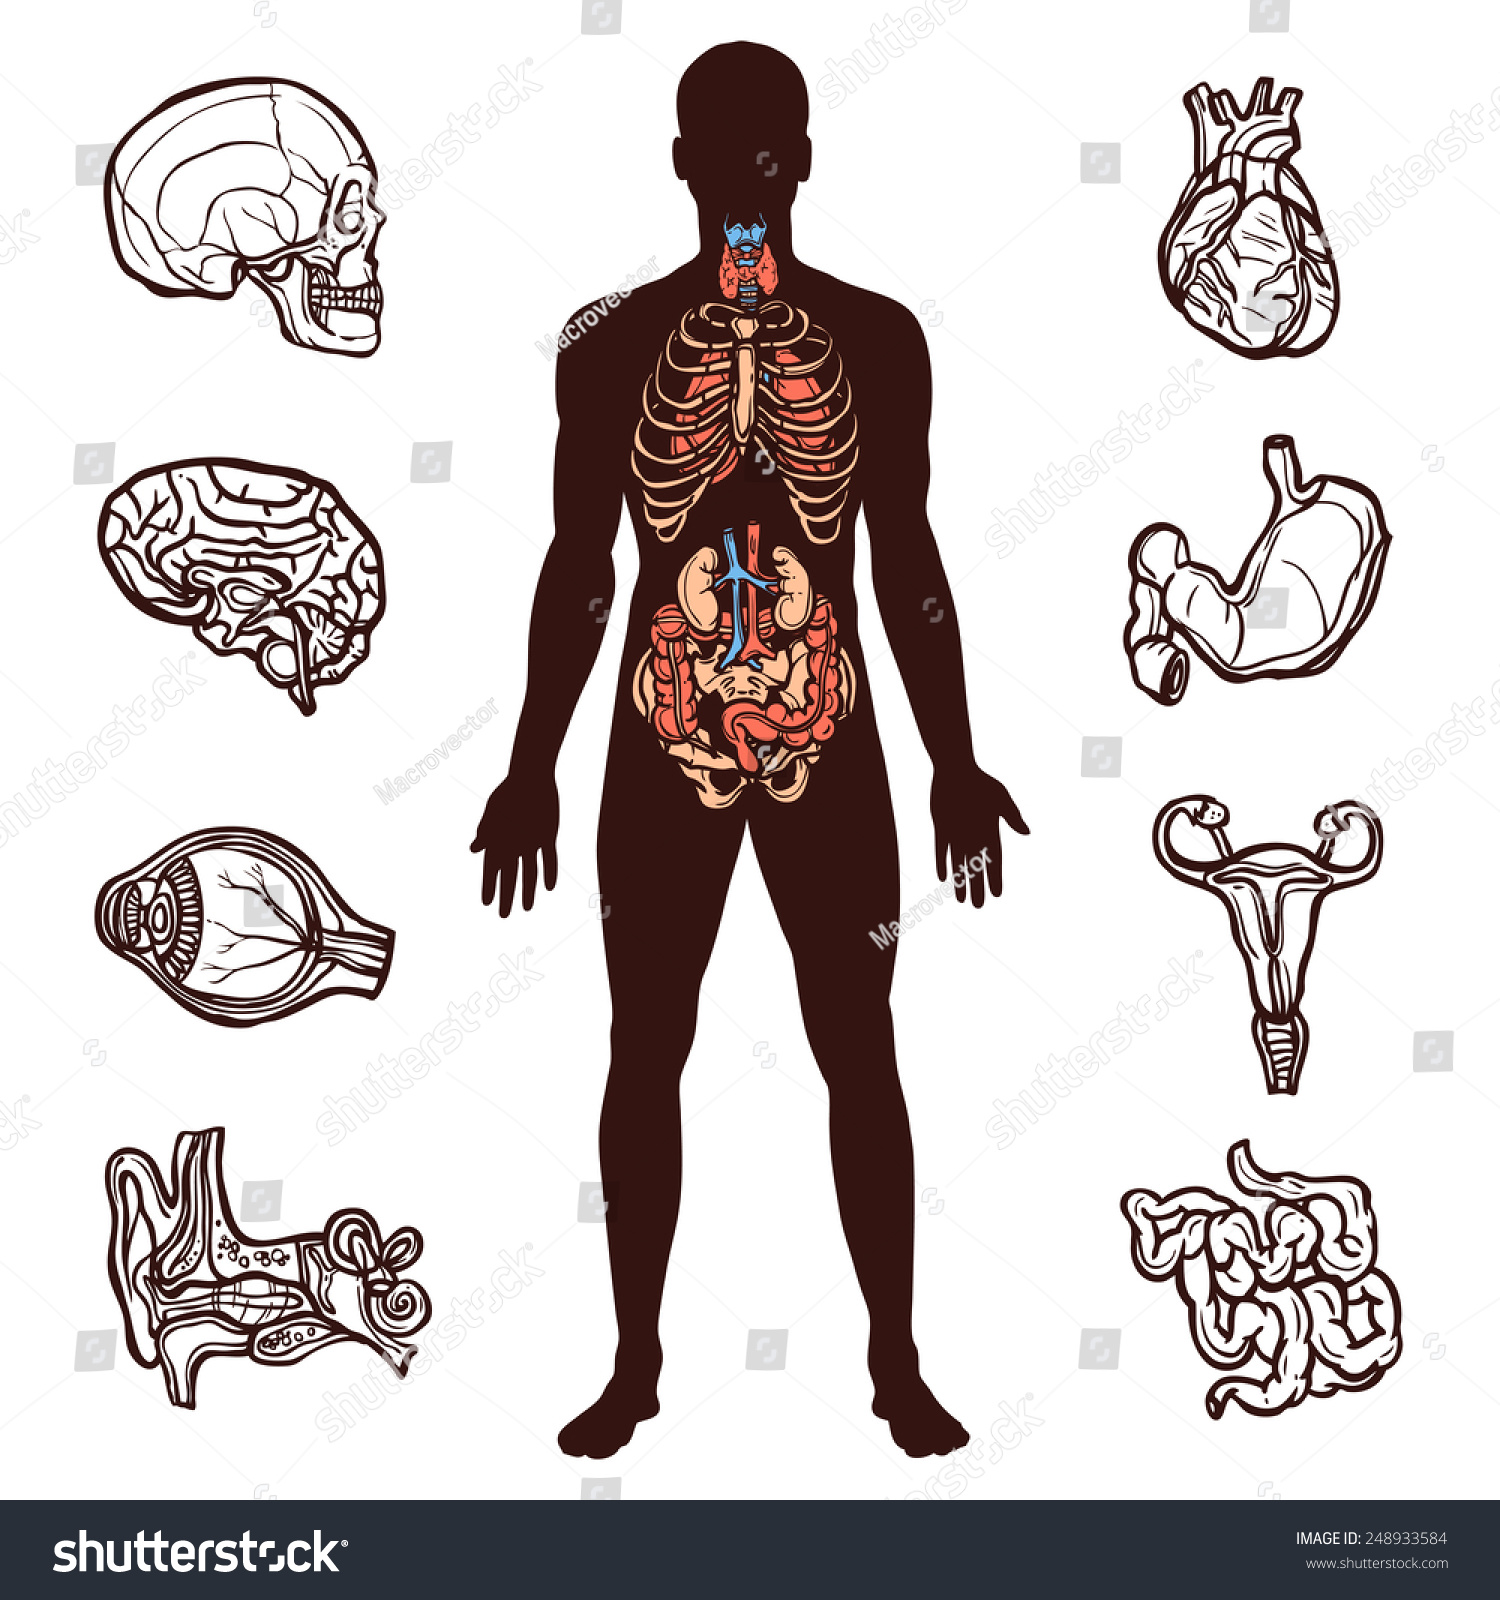 Anatomy Set With Sketch Internal Organs And Human Figure Isolated